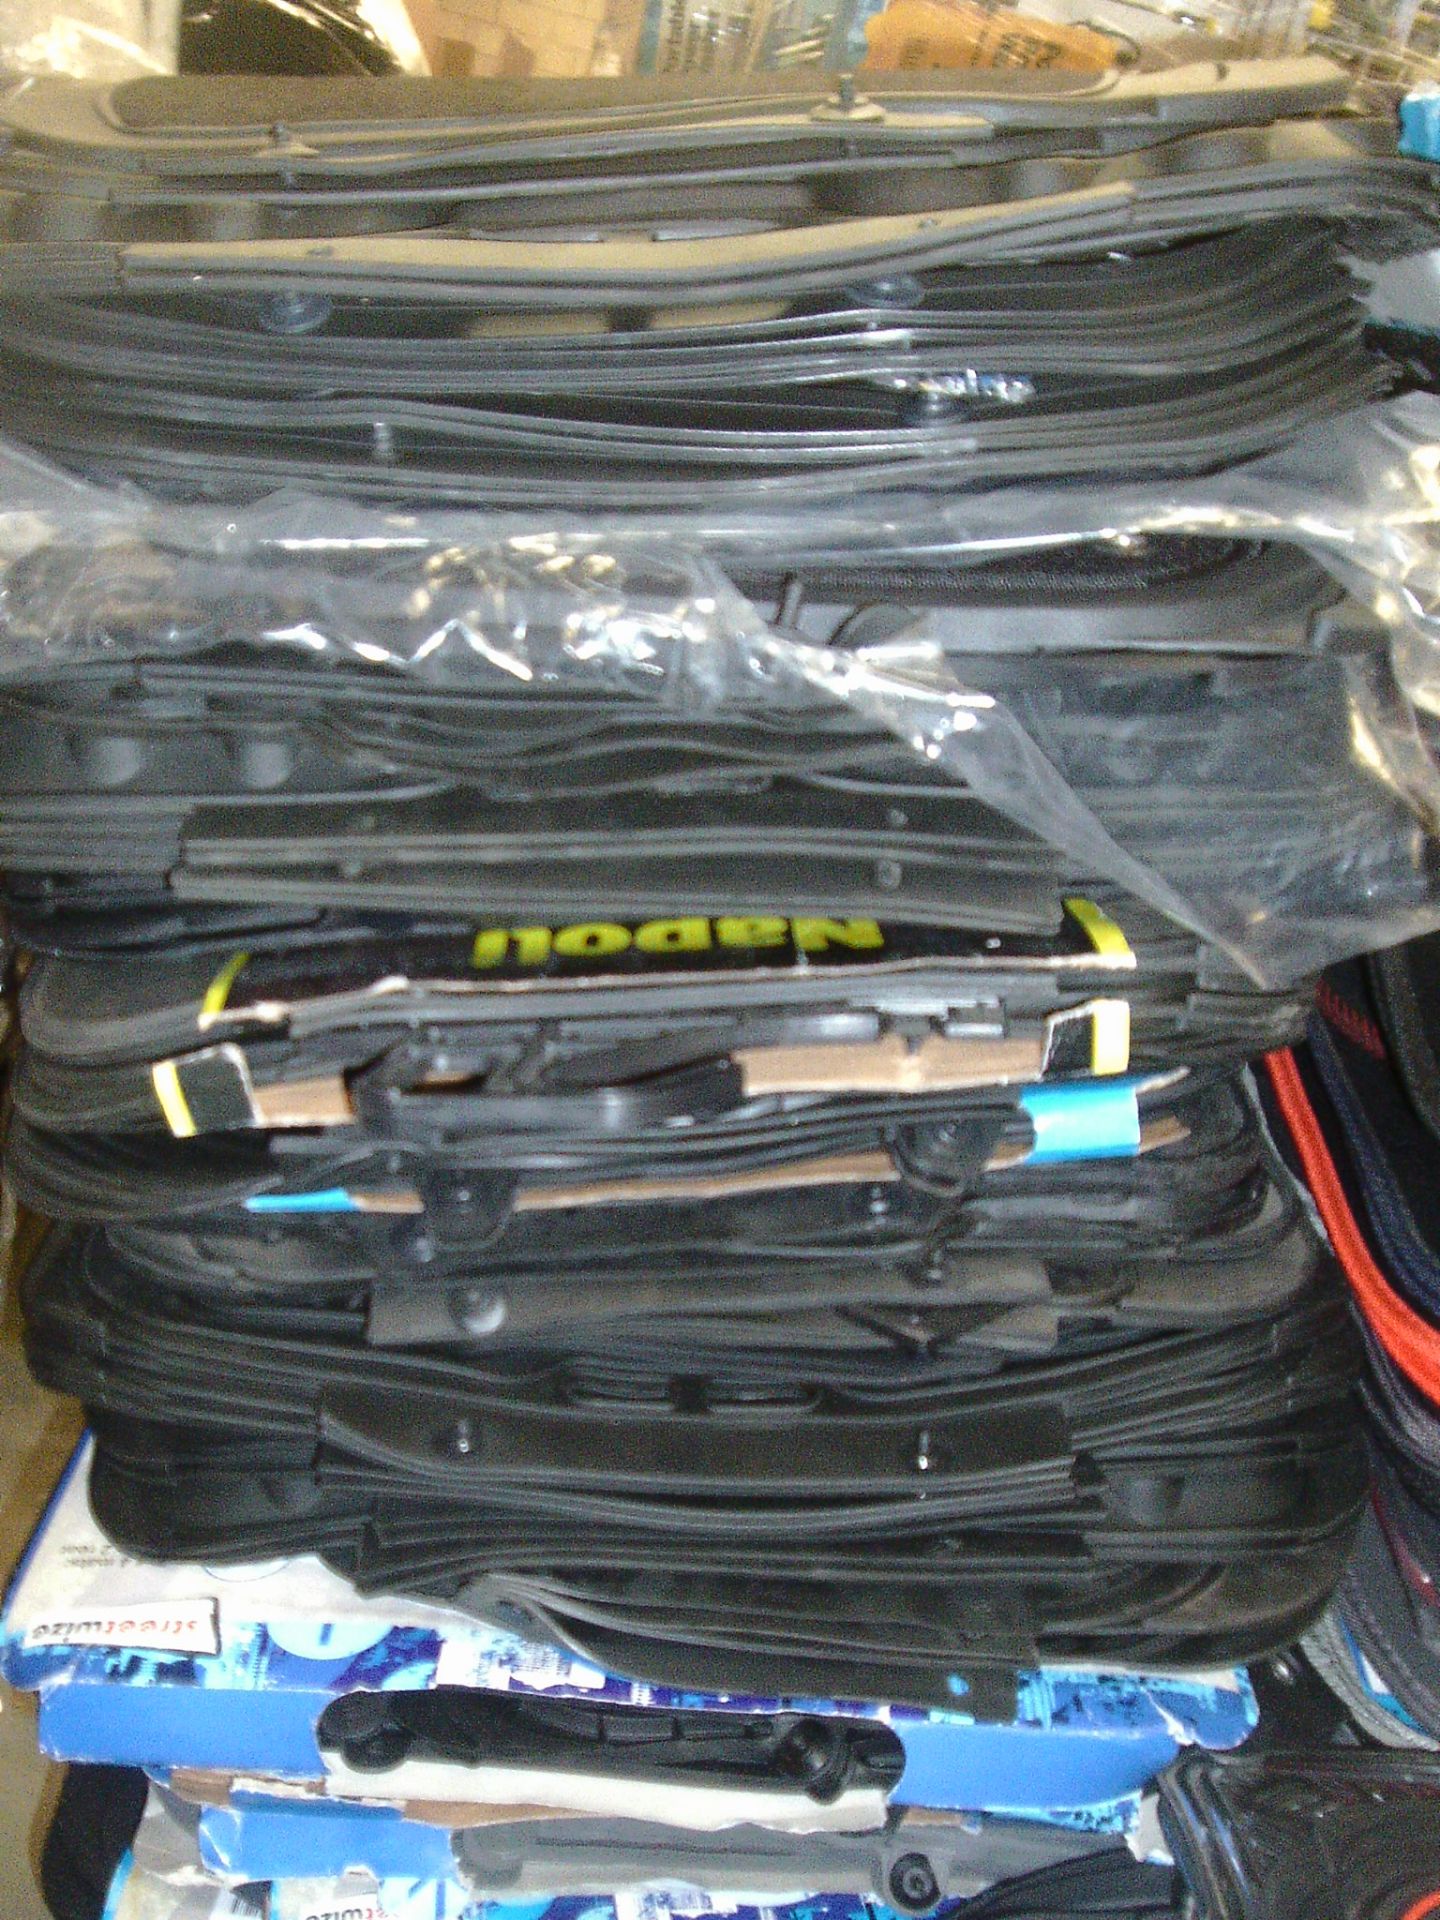 10 x sets of rubber mostly Heavy Duty car mat sets - all new - all complete ranging from £10 - £19. - Image 2 of 5